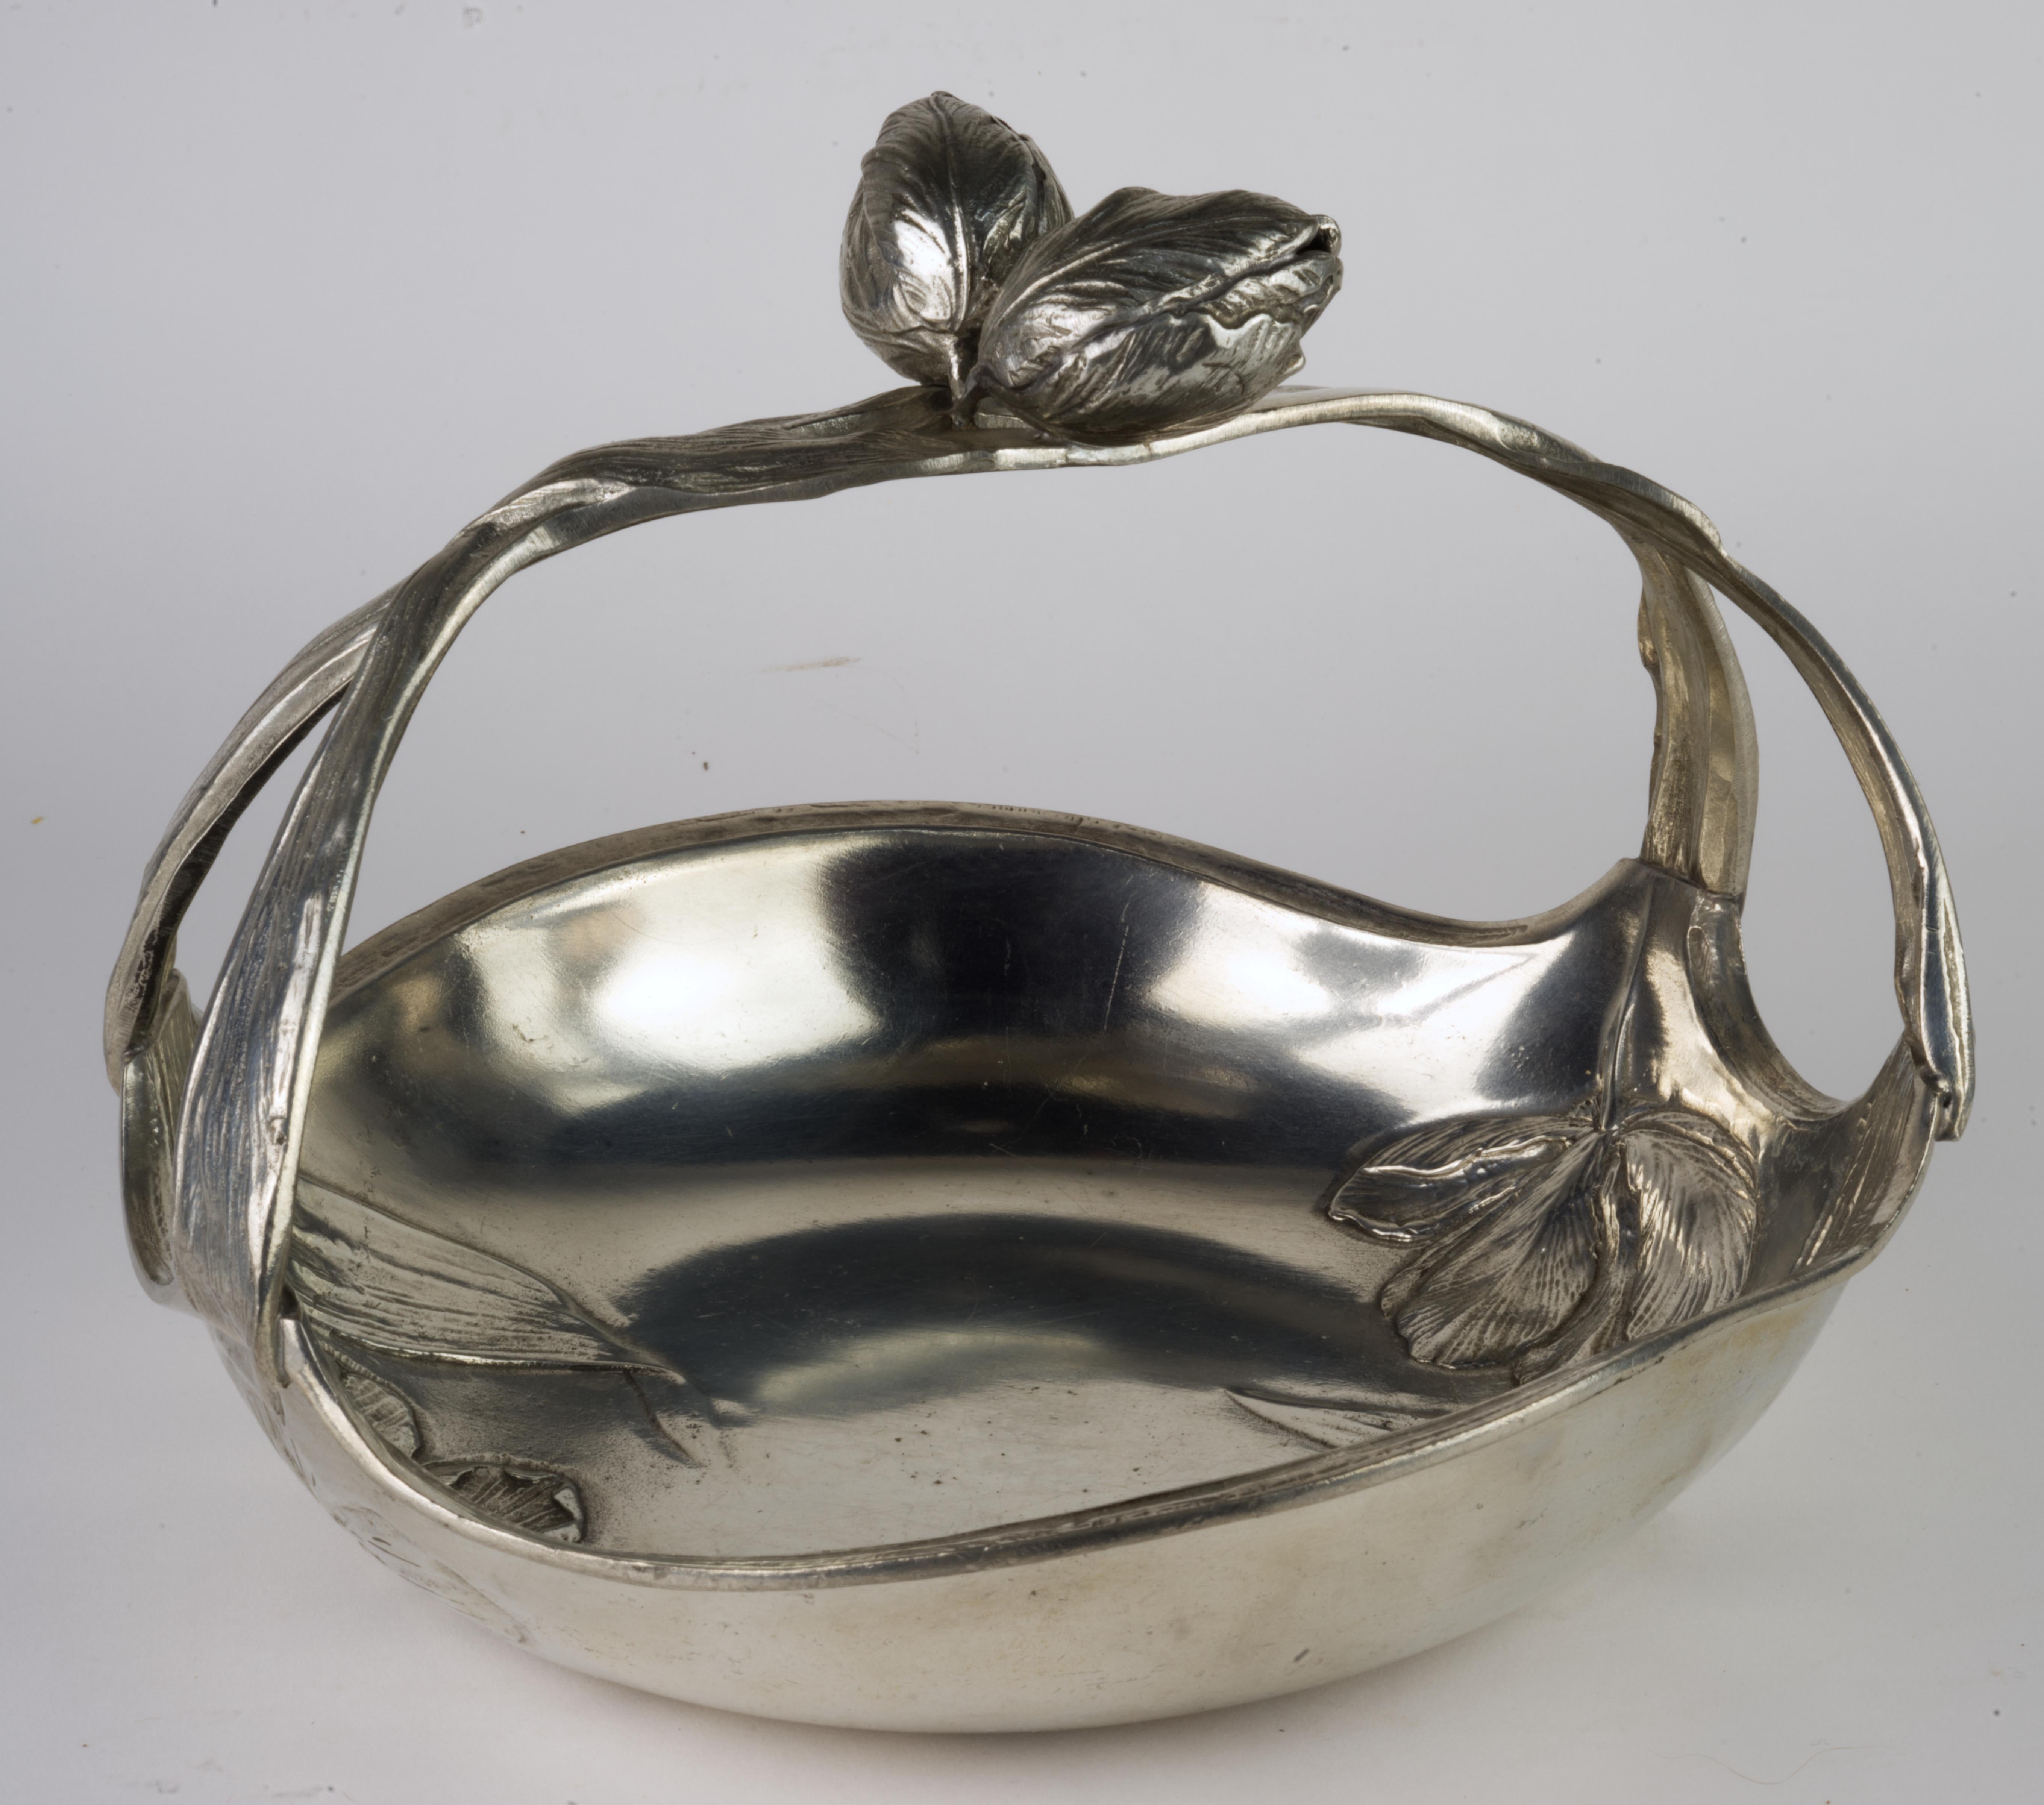 Art Nouveau Figural Basket is decorated with figurative tulips; the double handle has two unopened tulips on top. Baskets with very similar designs are documented in online catalogues and auction listings, signed with Achille Gamba stamps, with date